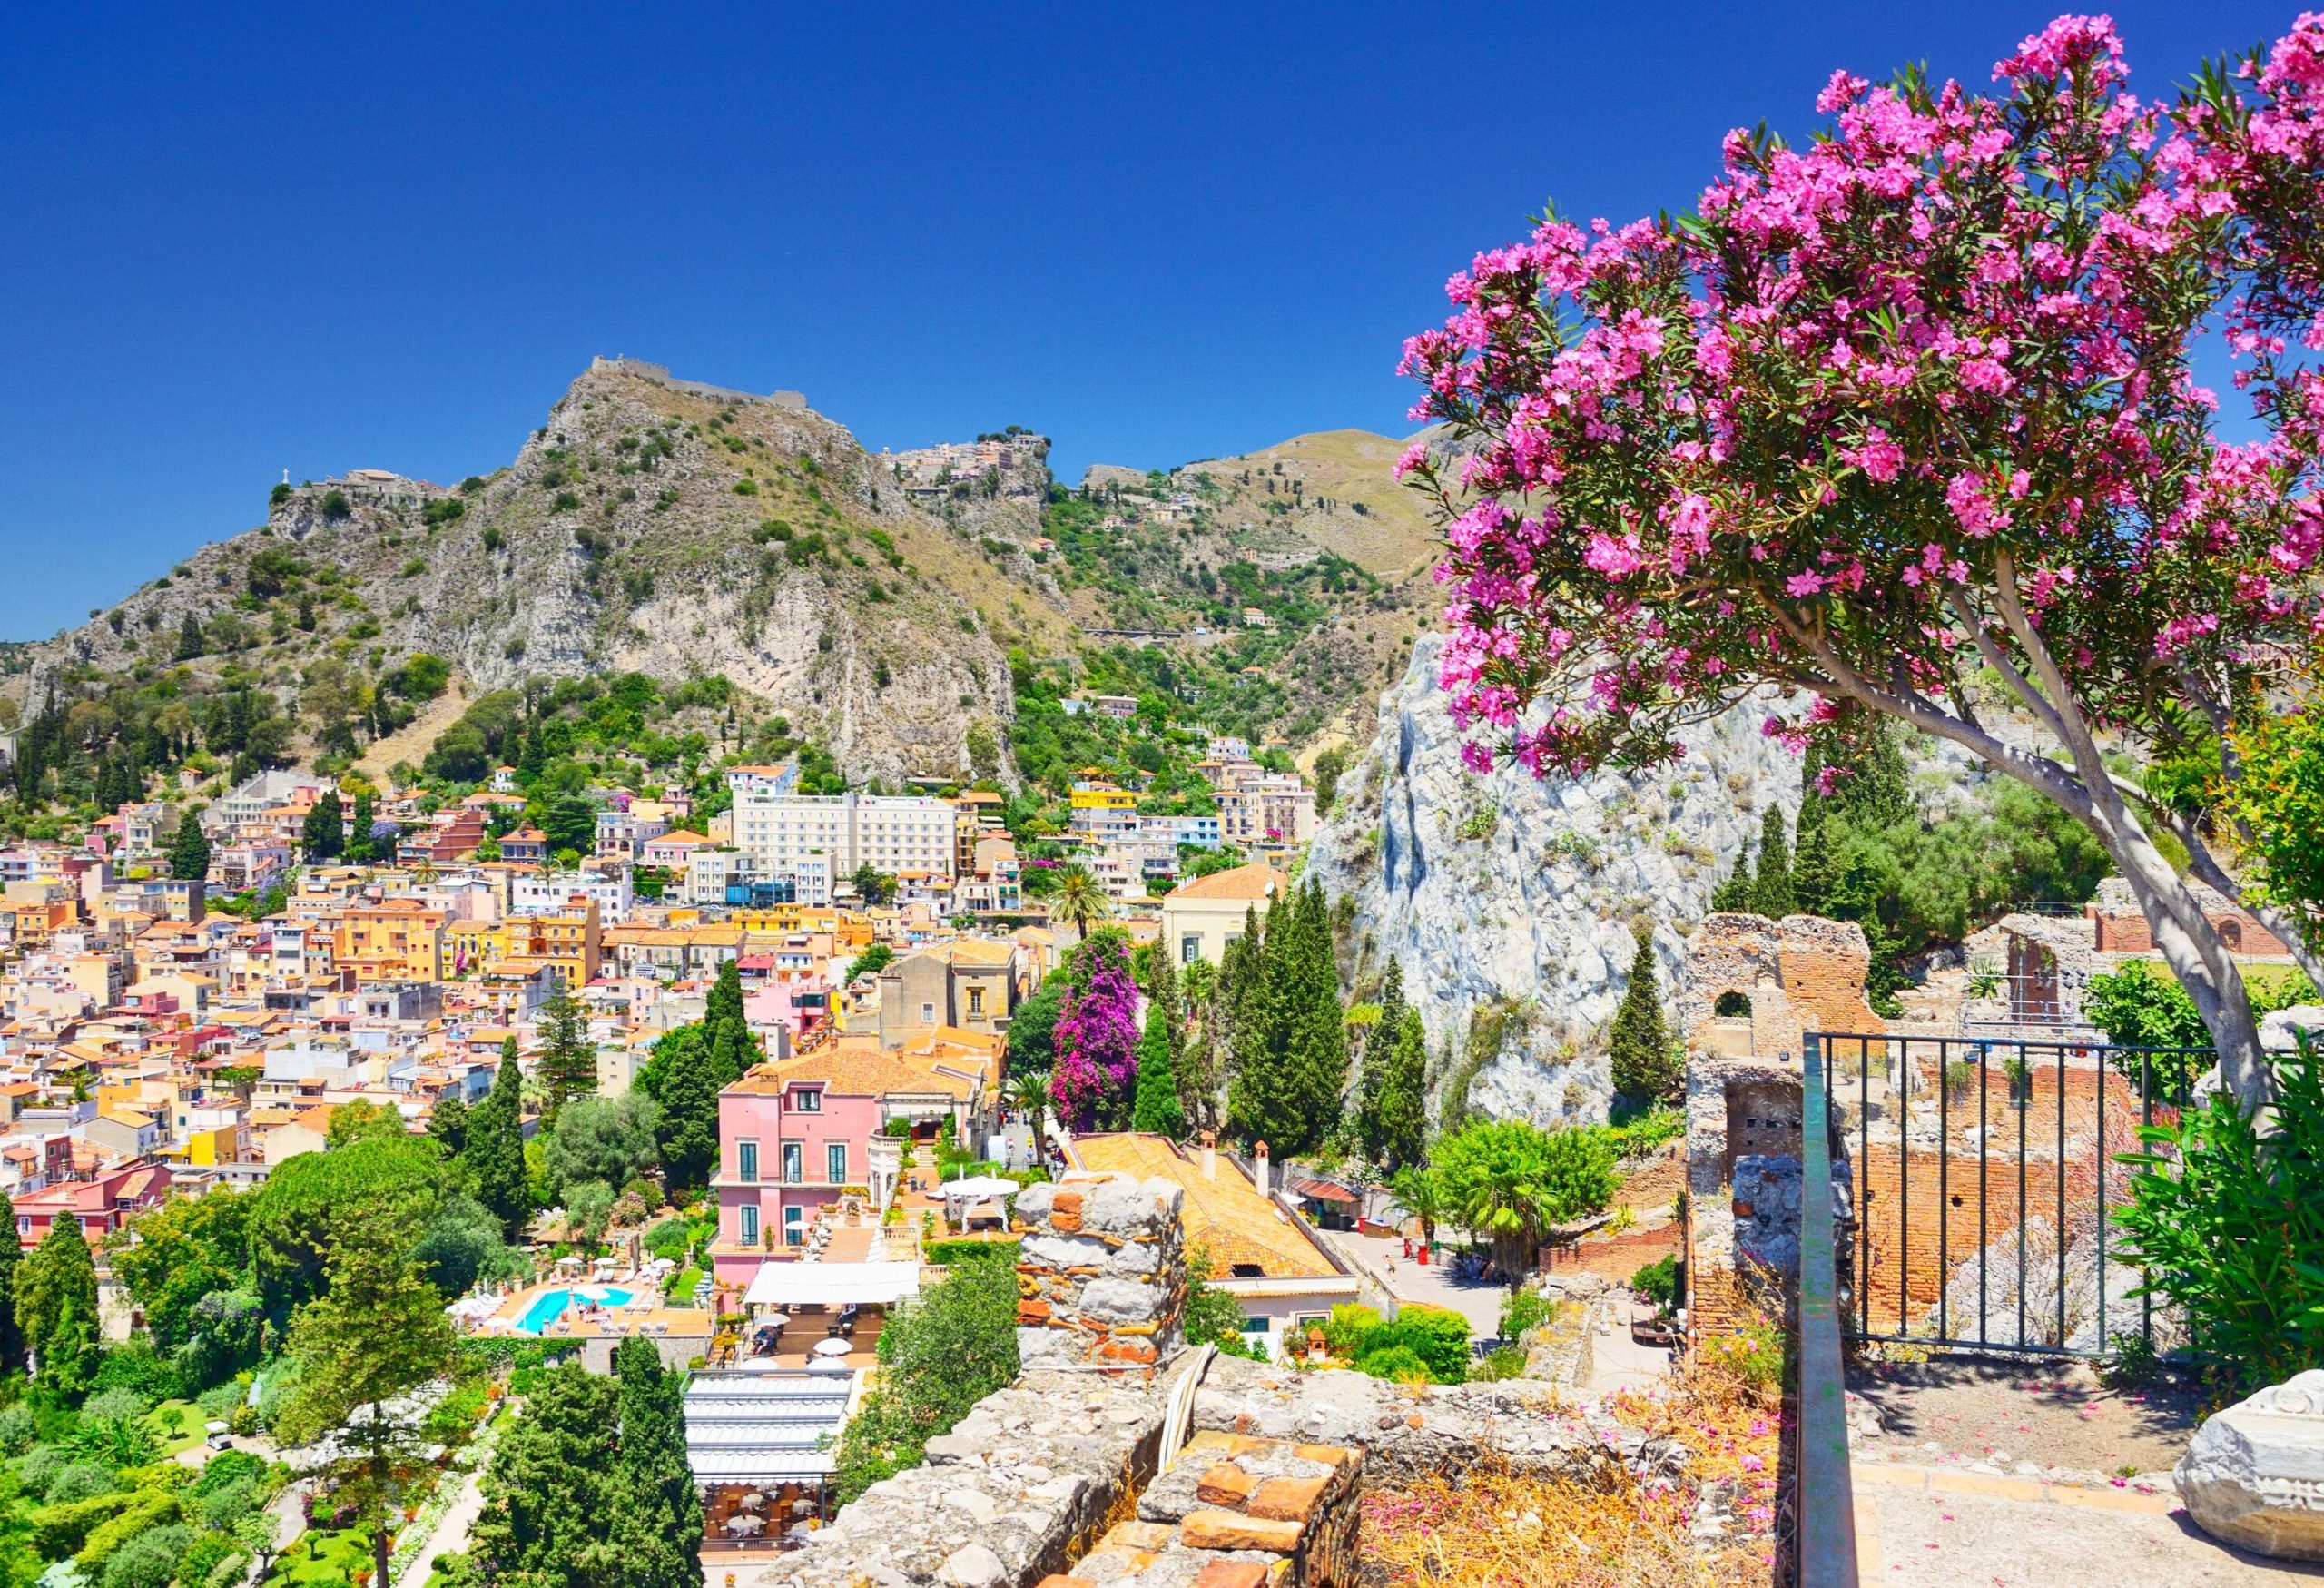 An old charming, colourful village set on the slope of a steep rock mountain. 